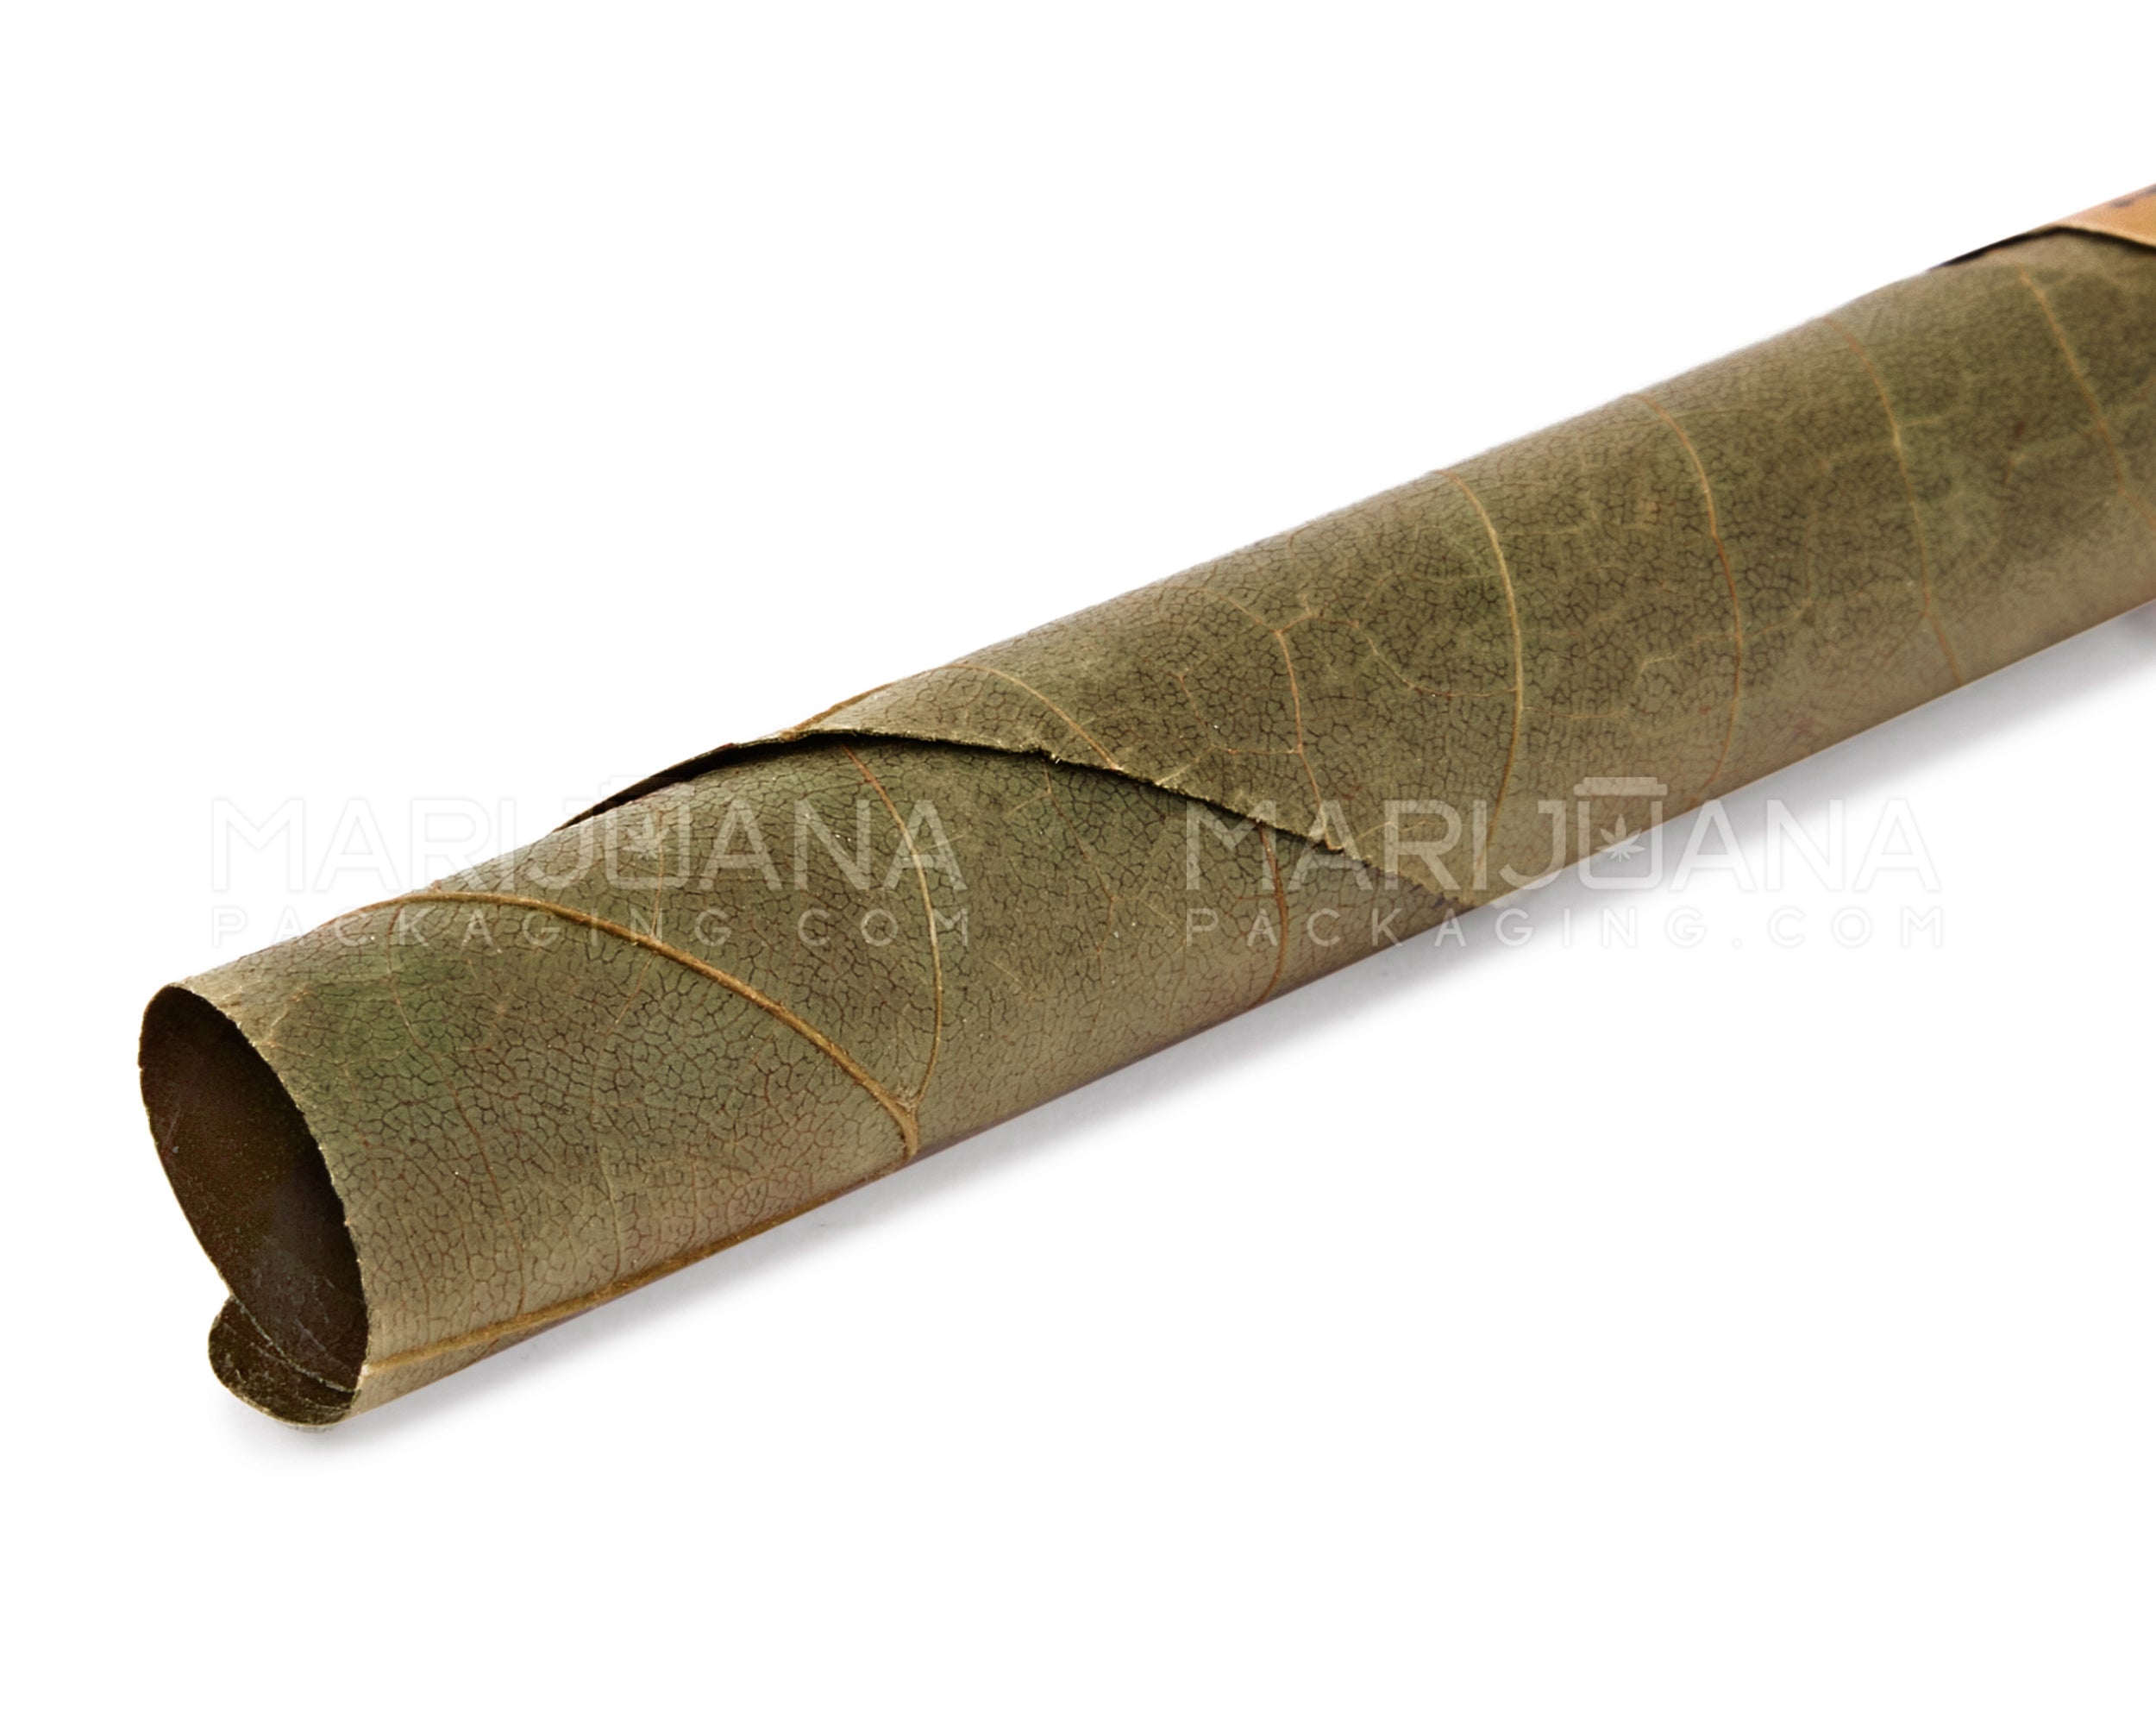 KING PALM | 'Retail Display' Slim Green Natural Leaf Blunt Wraps | 104mm - Berry Terps - 20 Count